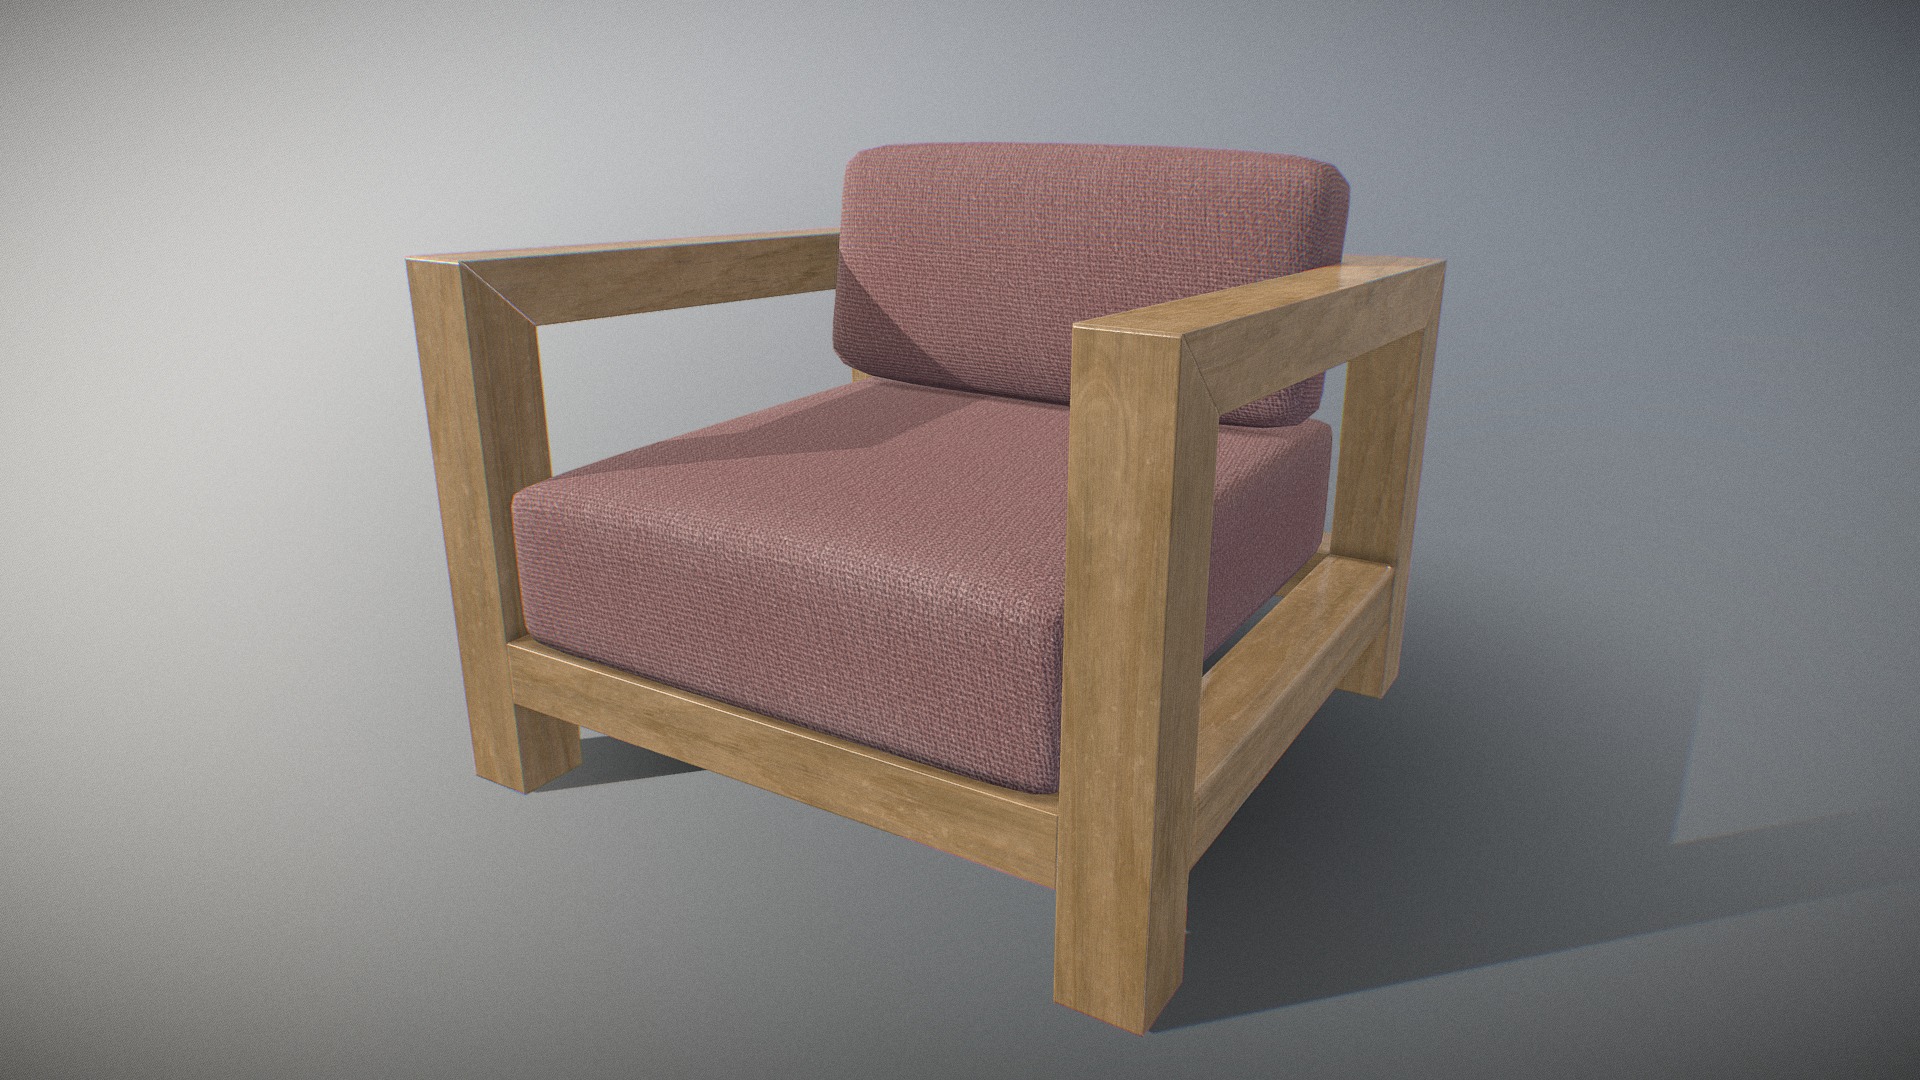 3D model Veroda Angle Sofa 03 - This is a 3D model of the Veroda Angle Sofa 03. The 3D model is about a wooden chair with a cushion.